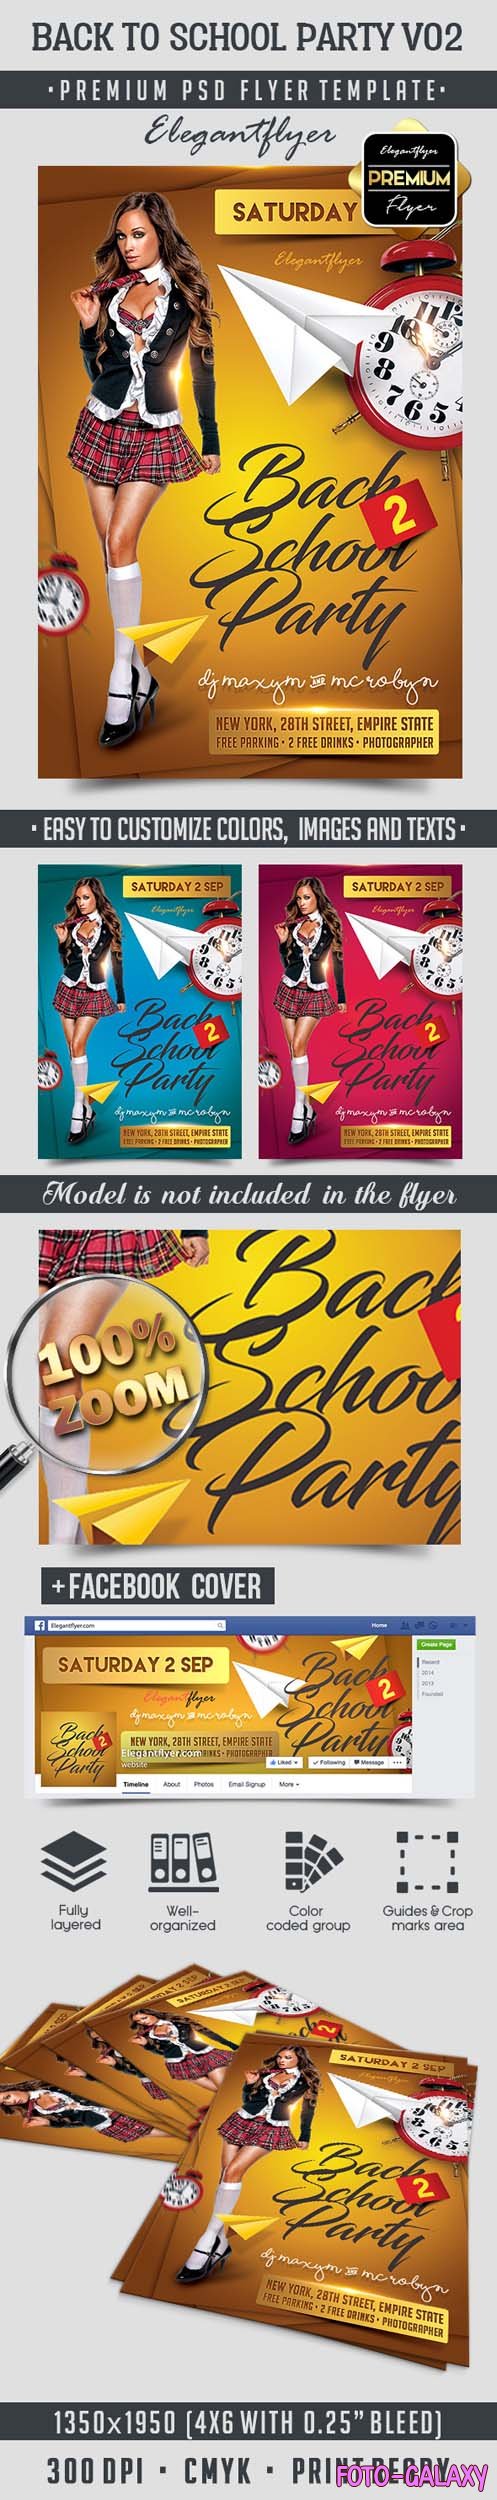 Back to School Party V02 Flyer PSD Template